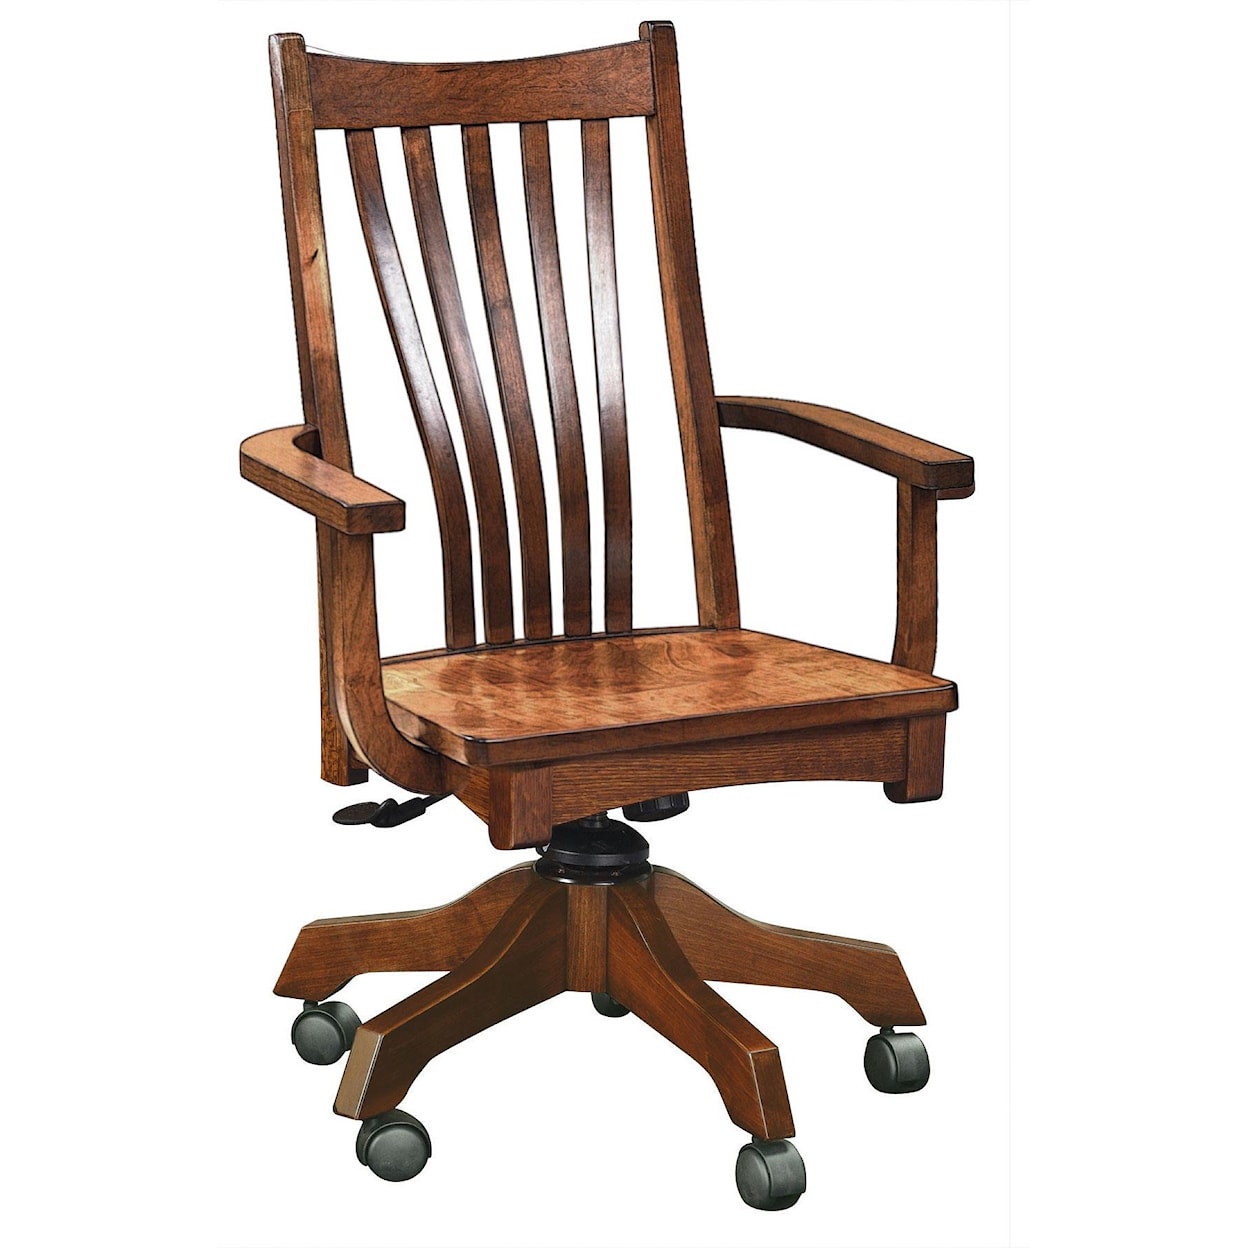 Wengerd Wood Products Reagan Desk Chair